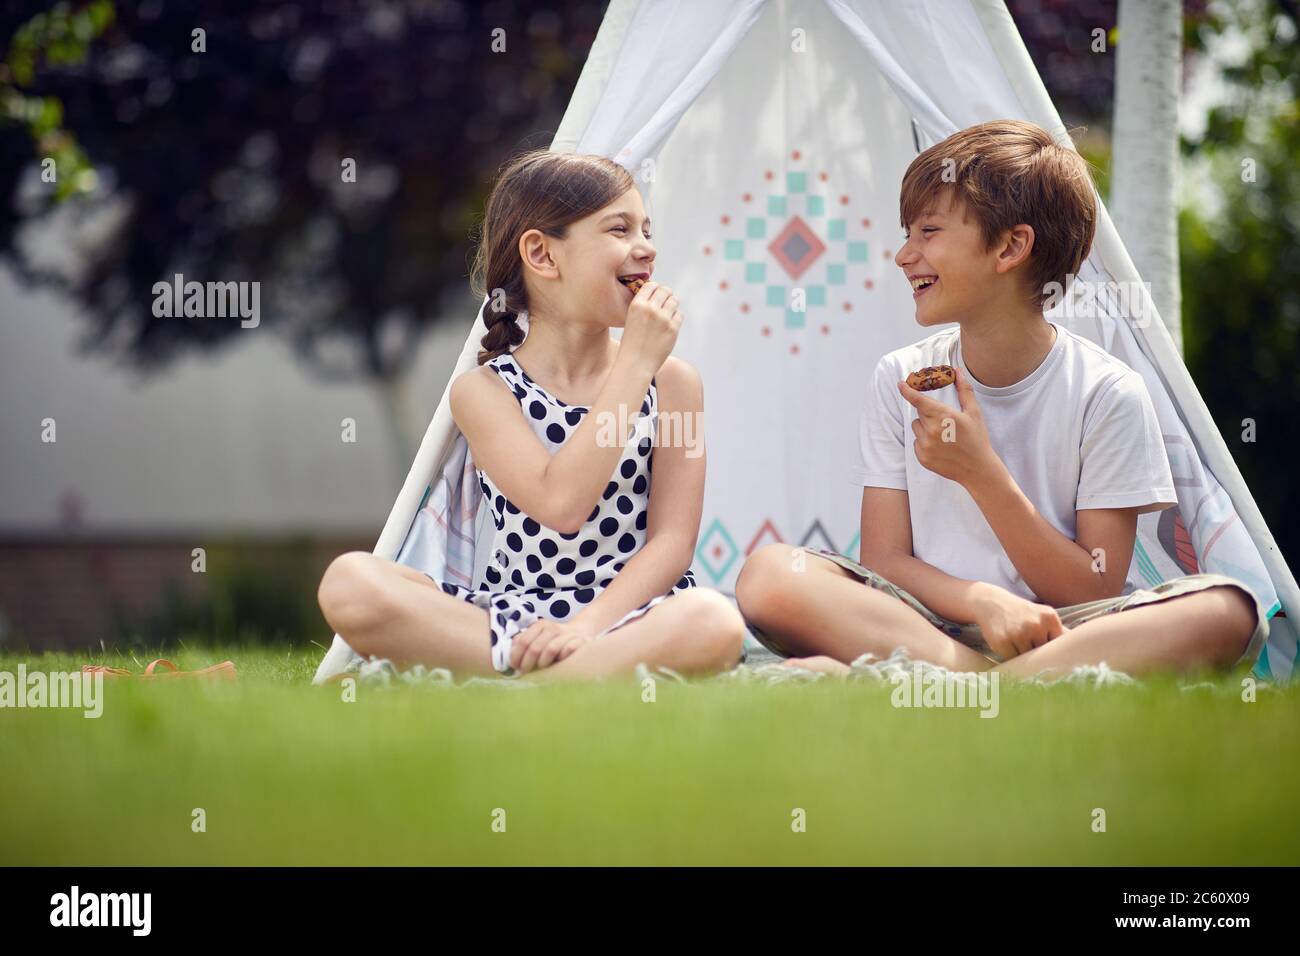 Summer time fun. Smiling boy and girl playing at backyard in teepee and eats cookies. Stock Photo